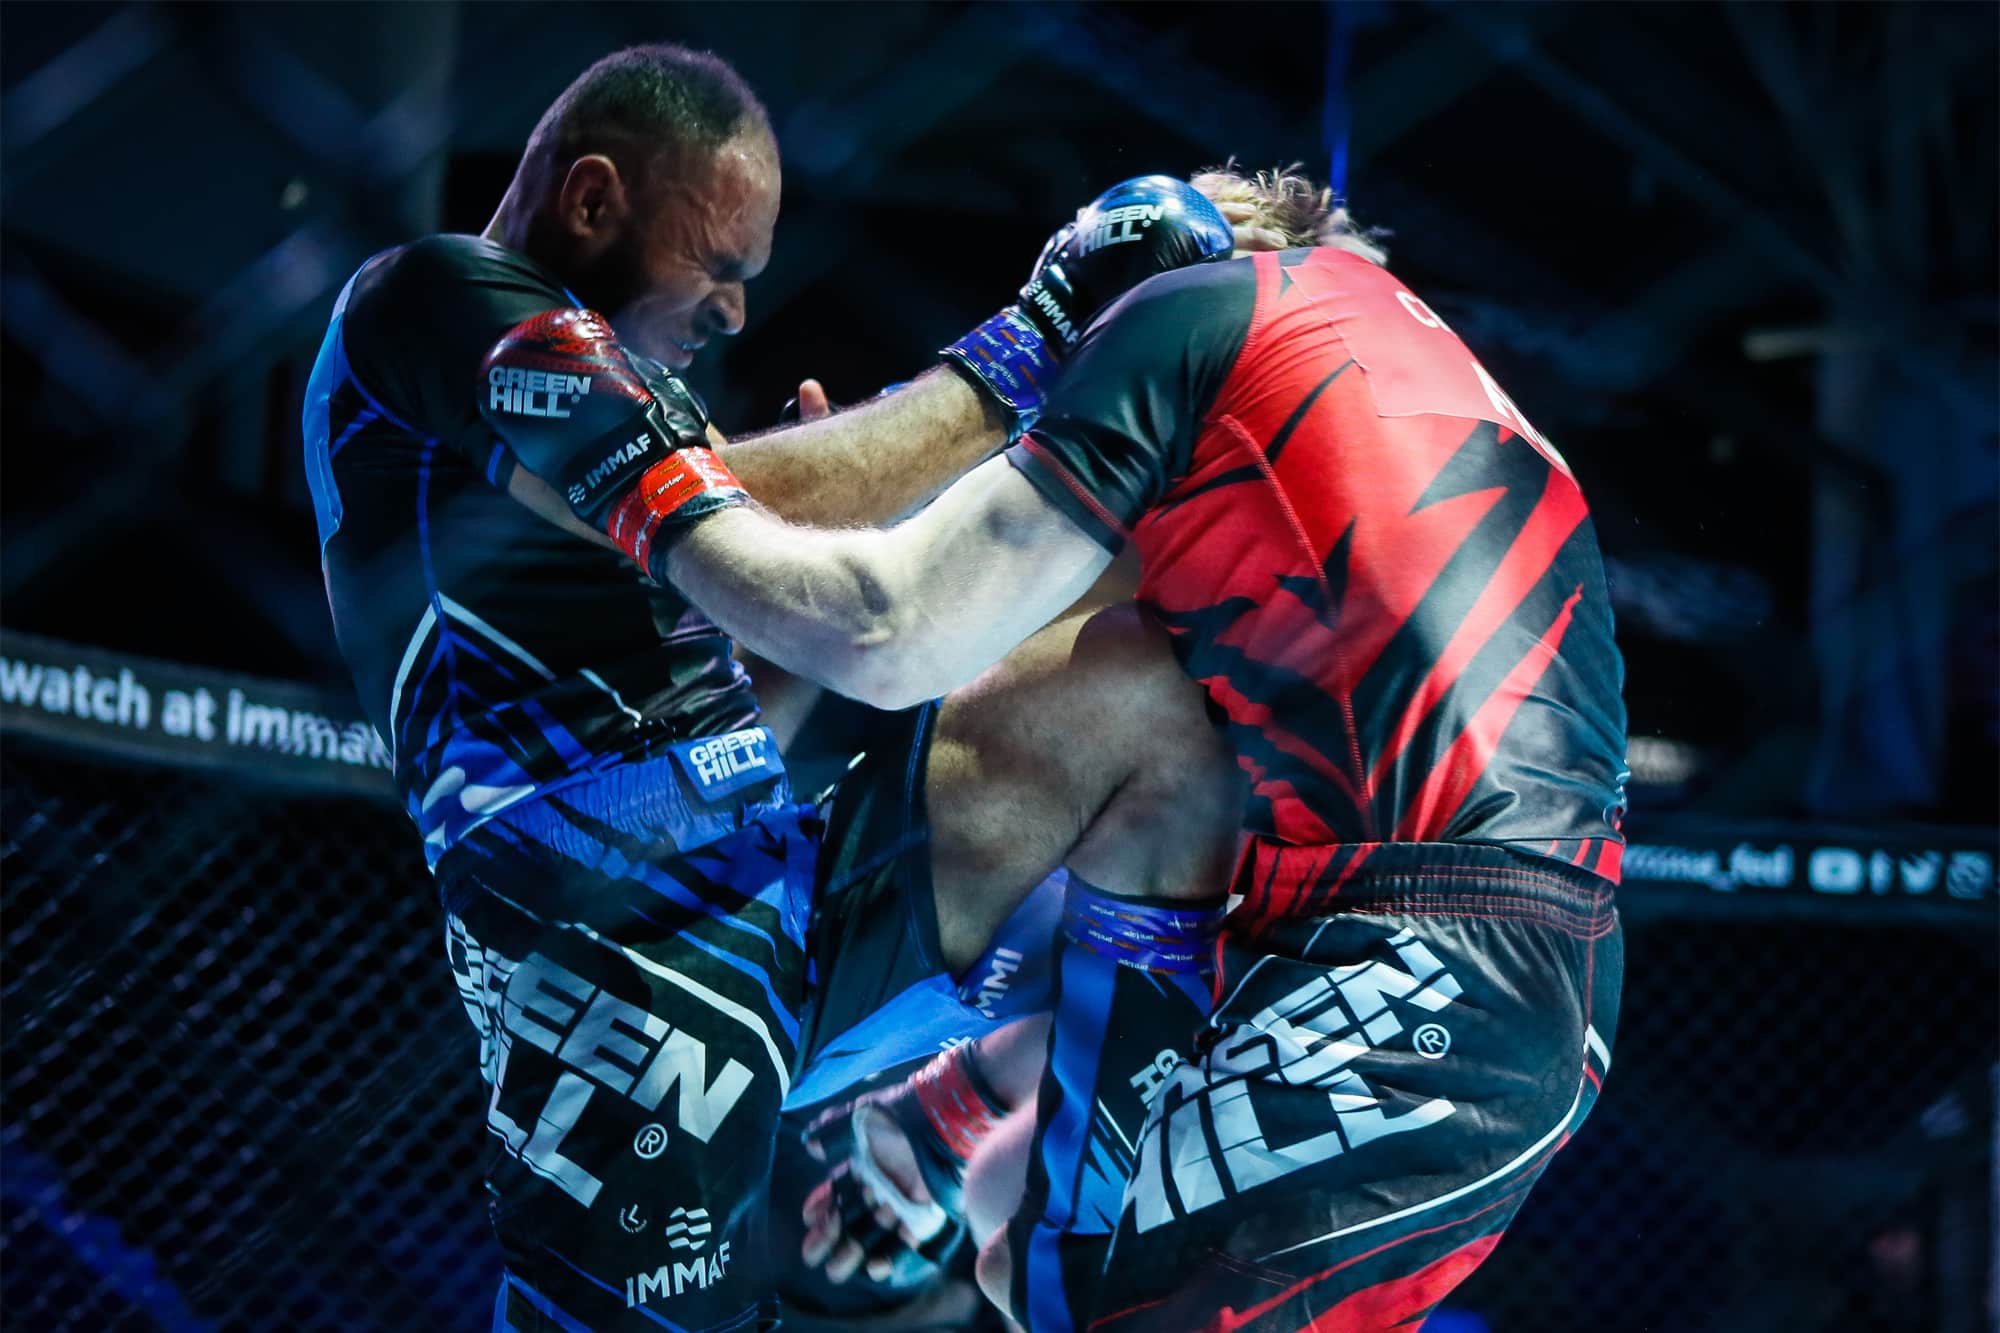 IMMAF alumni Duncan faces toughest pro challenge at Cage Warriors 120